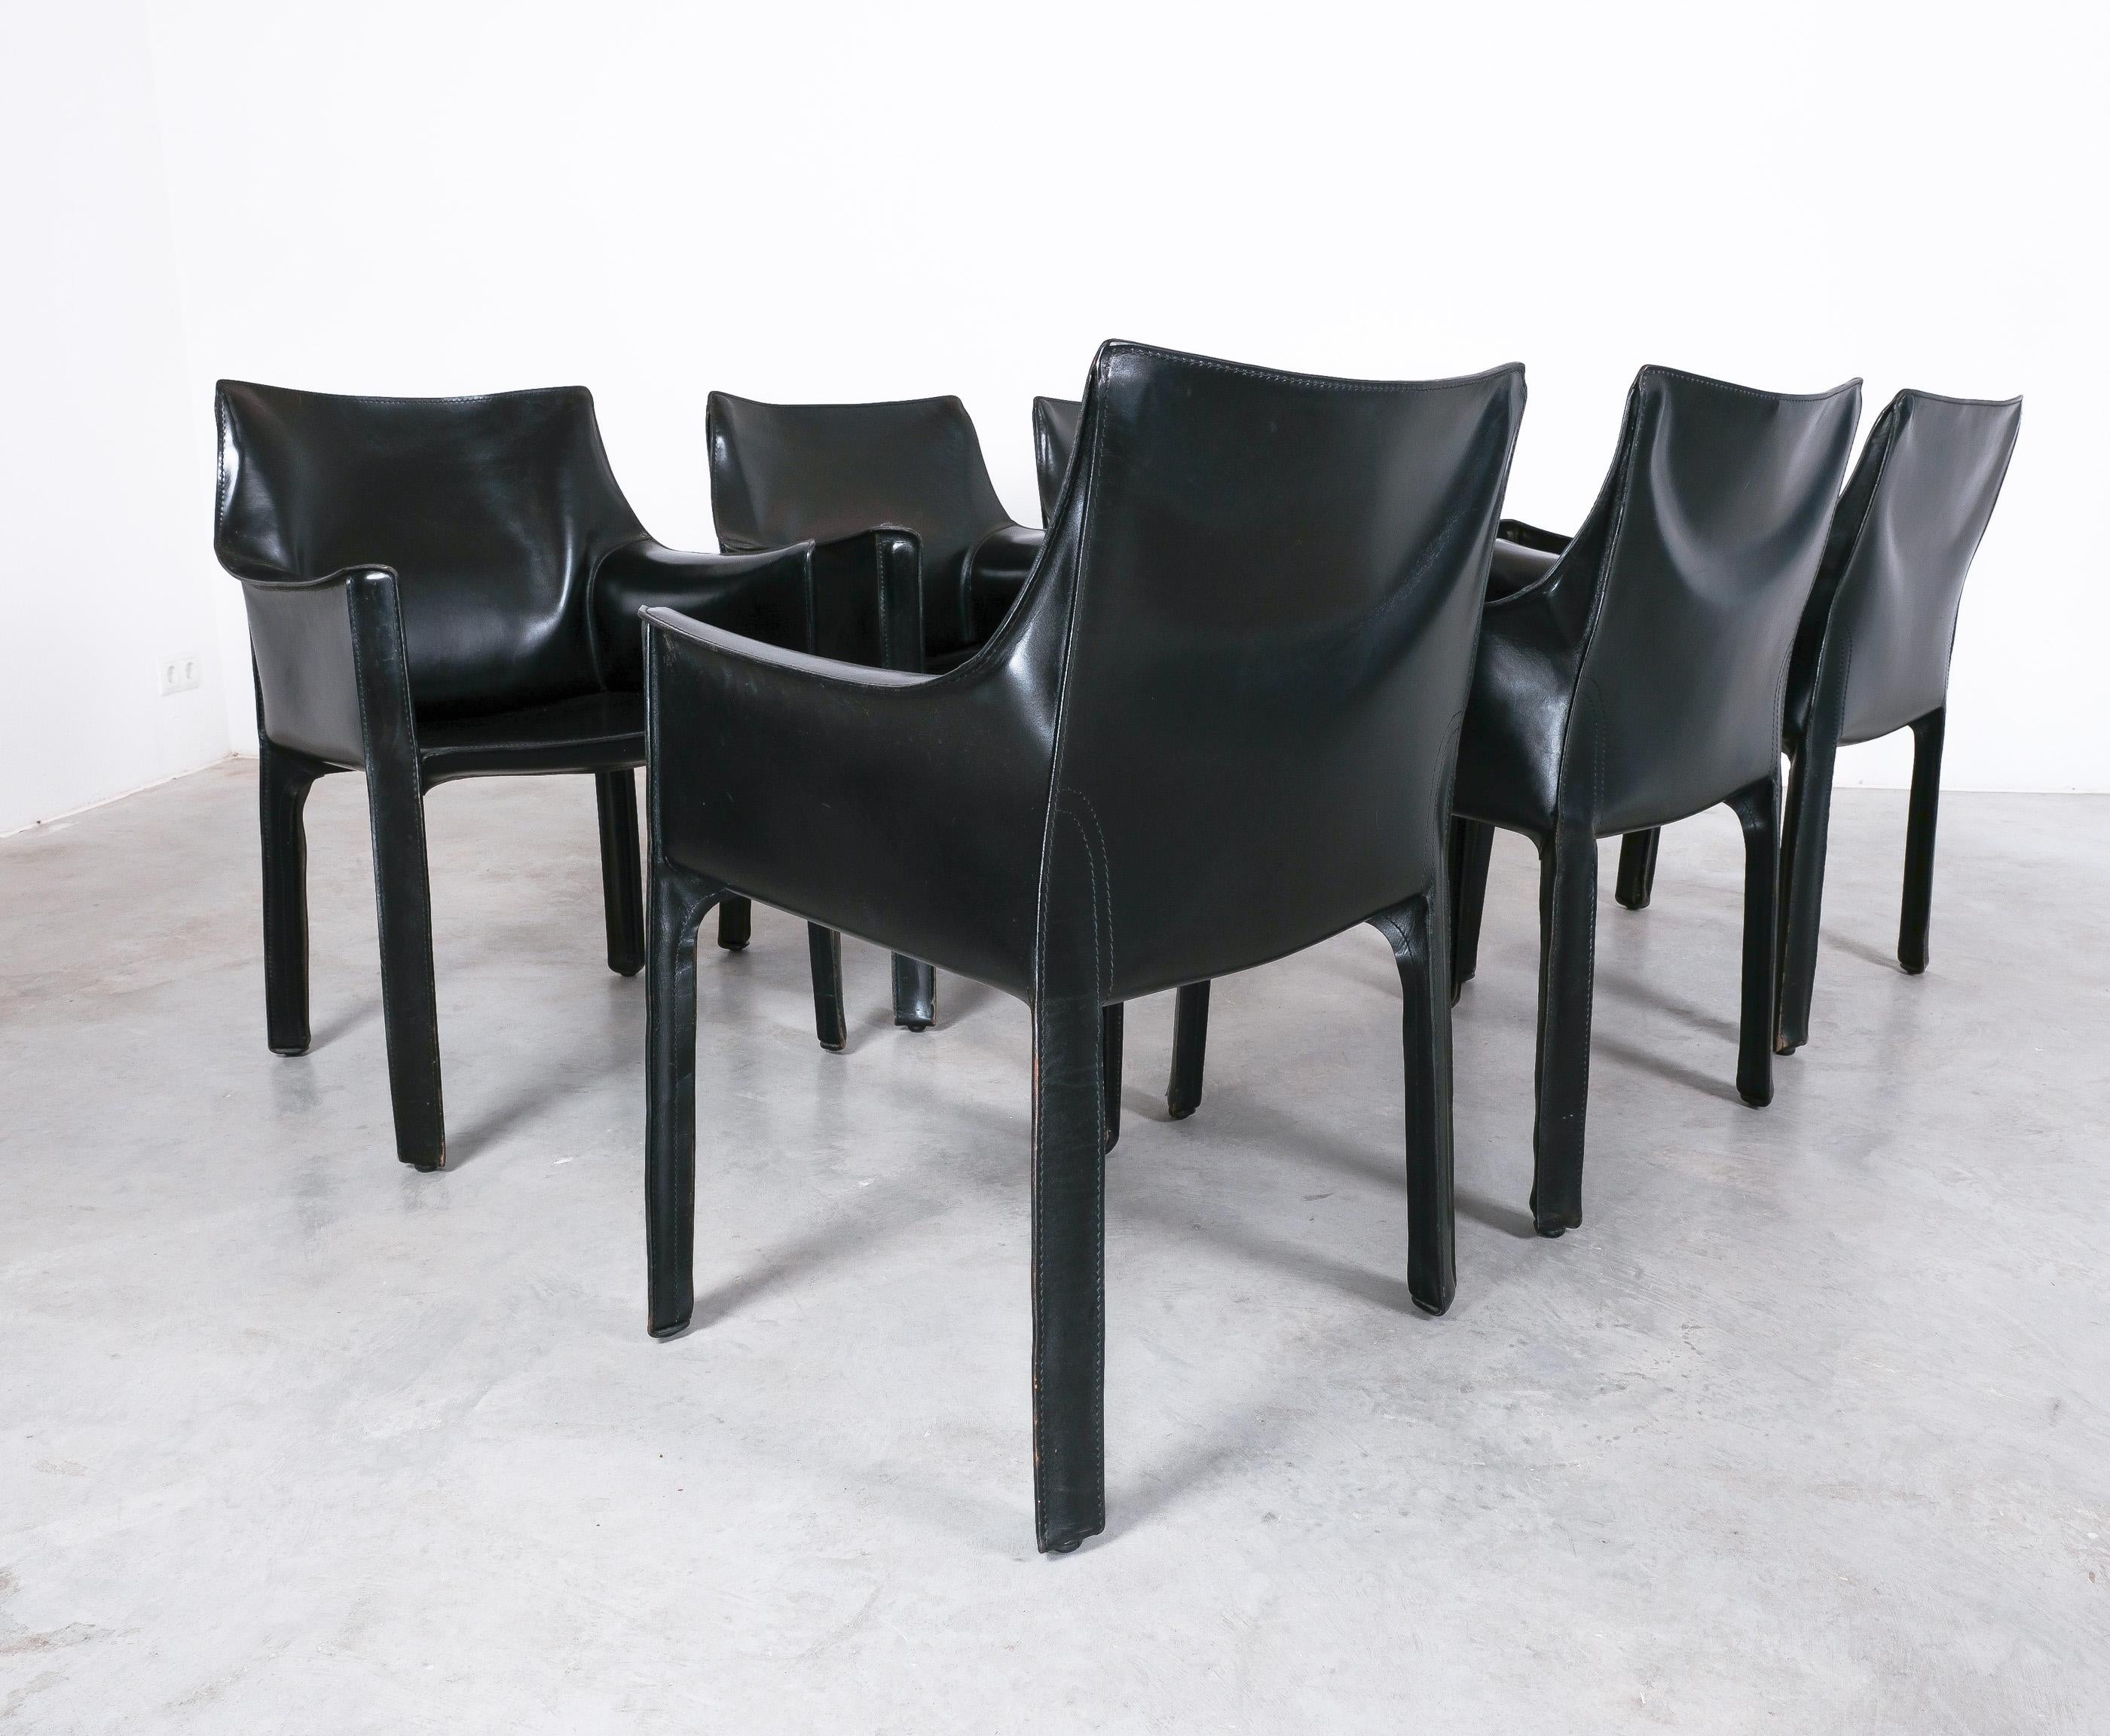 Post-Modern Mario Bellini Cab 413 Set of 6 Black Leather Dining Chairs, Italy